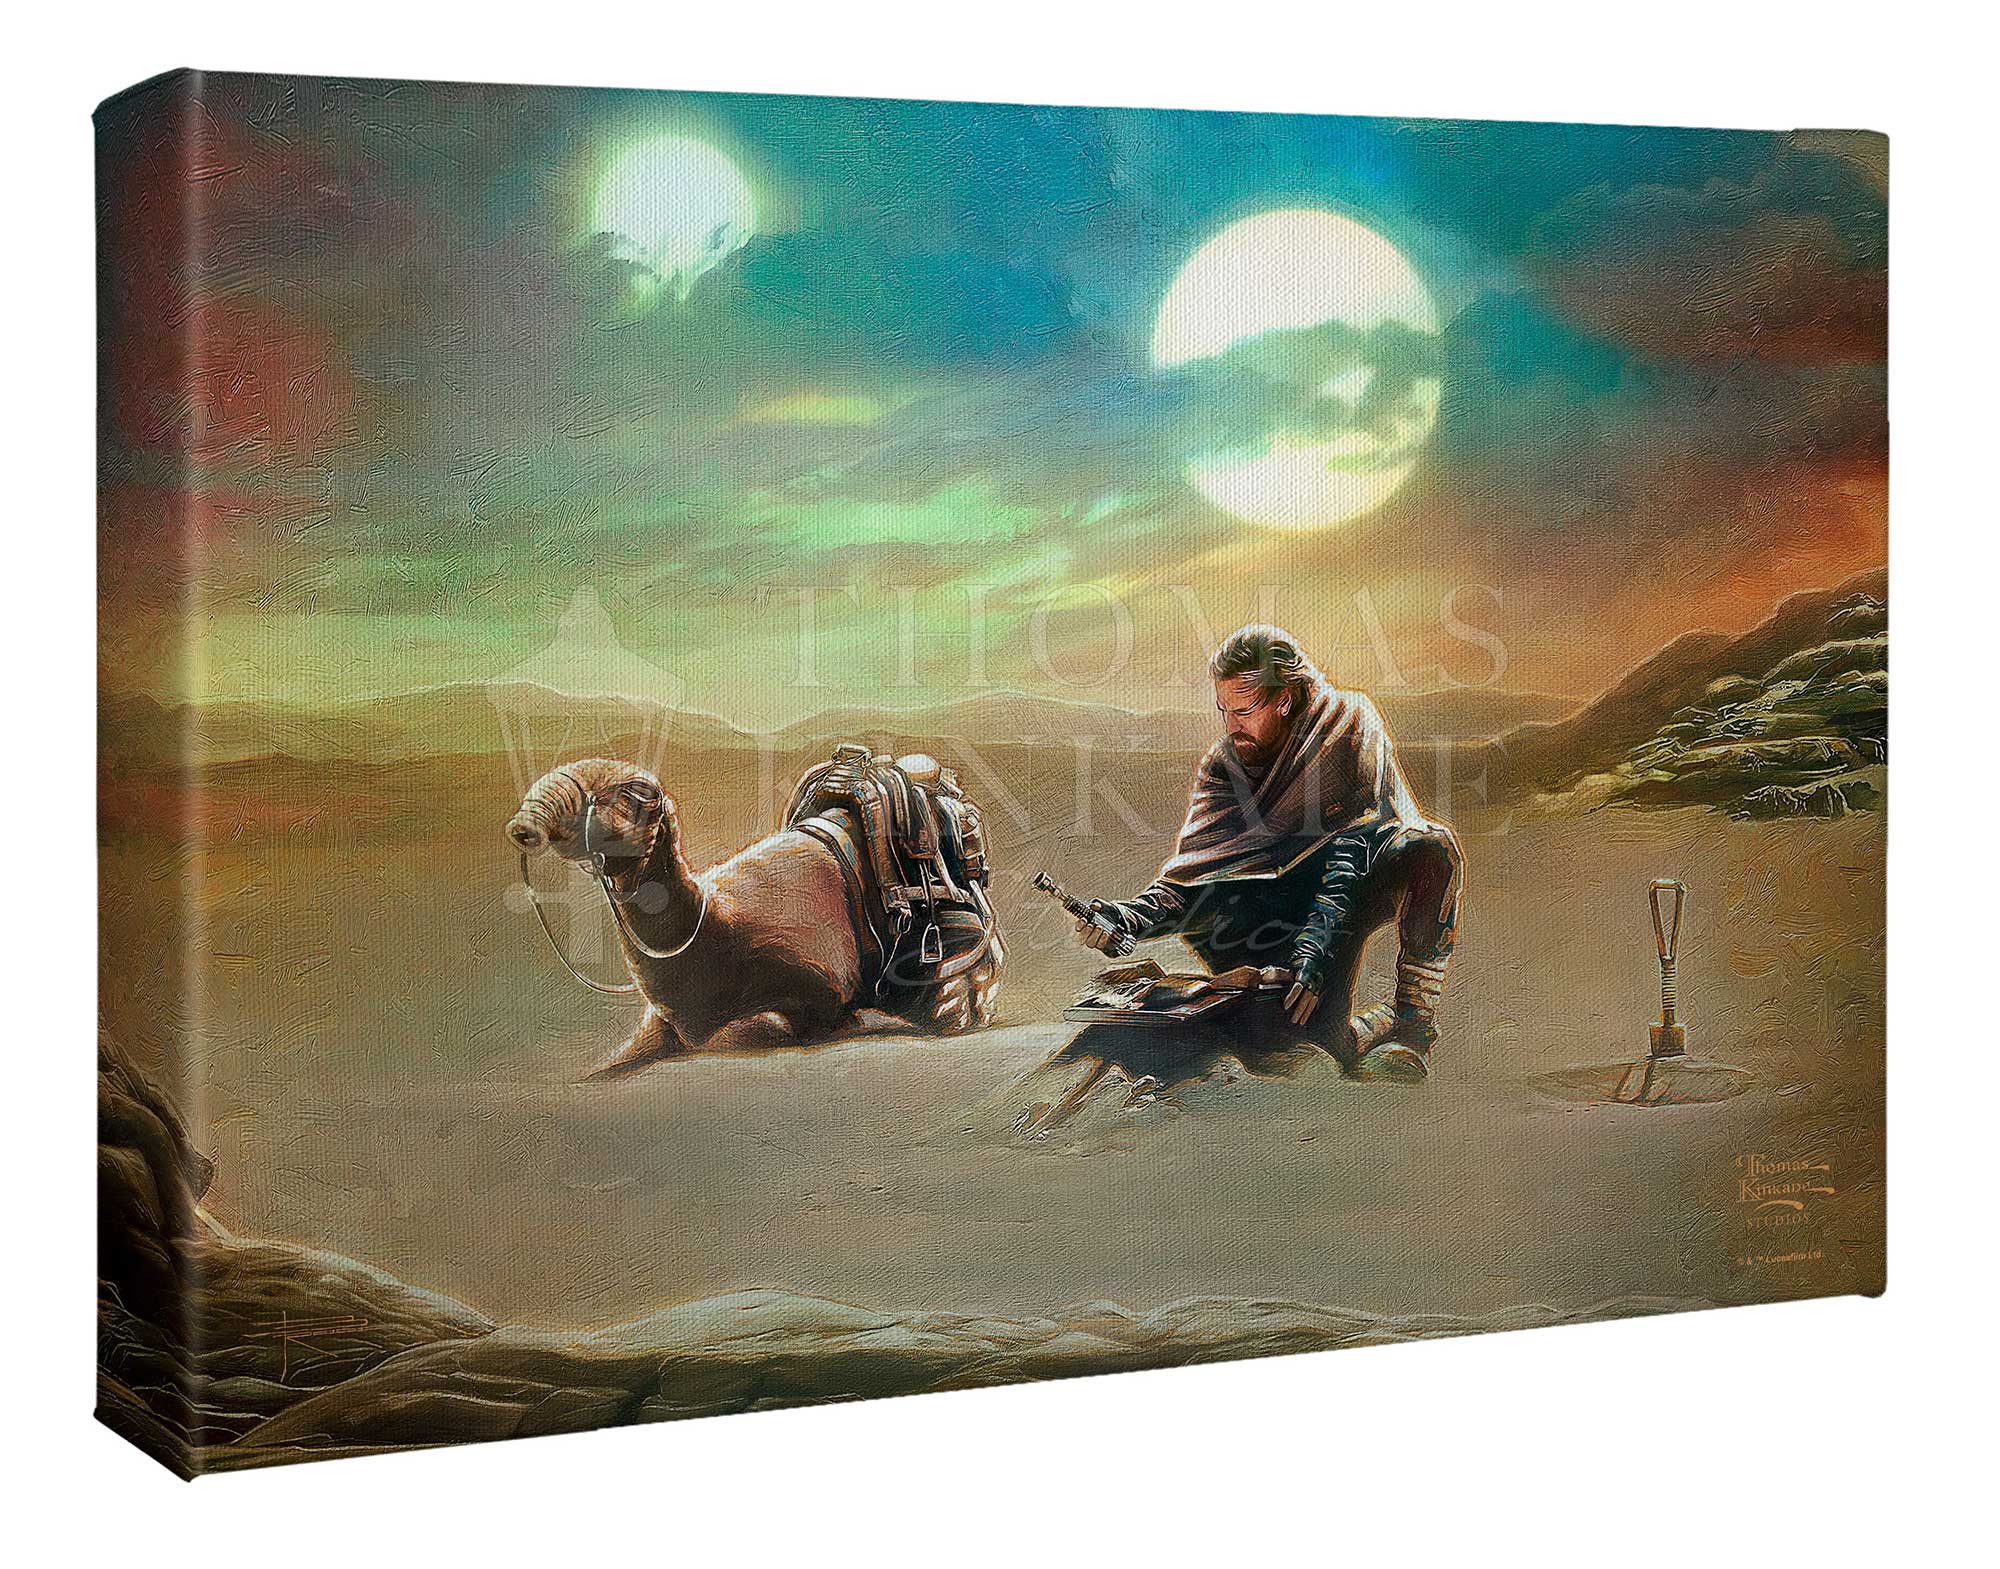 Featuring Obi-Wan Kenobi in Tatooine watching over a young Luke Skywalker. Gallery Wrapped Canvas